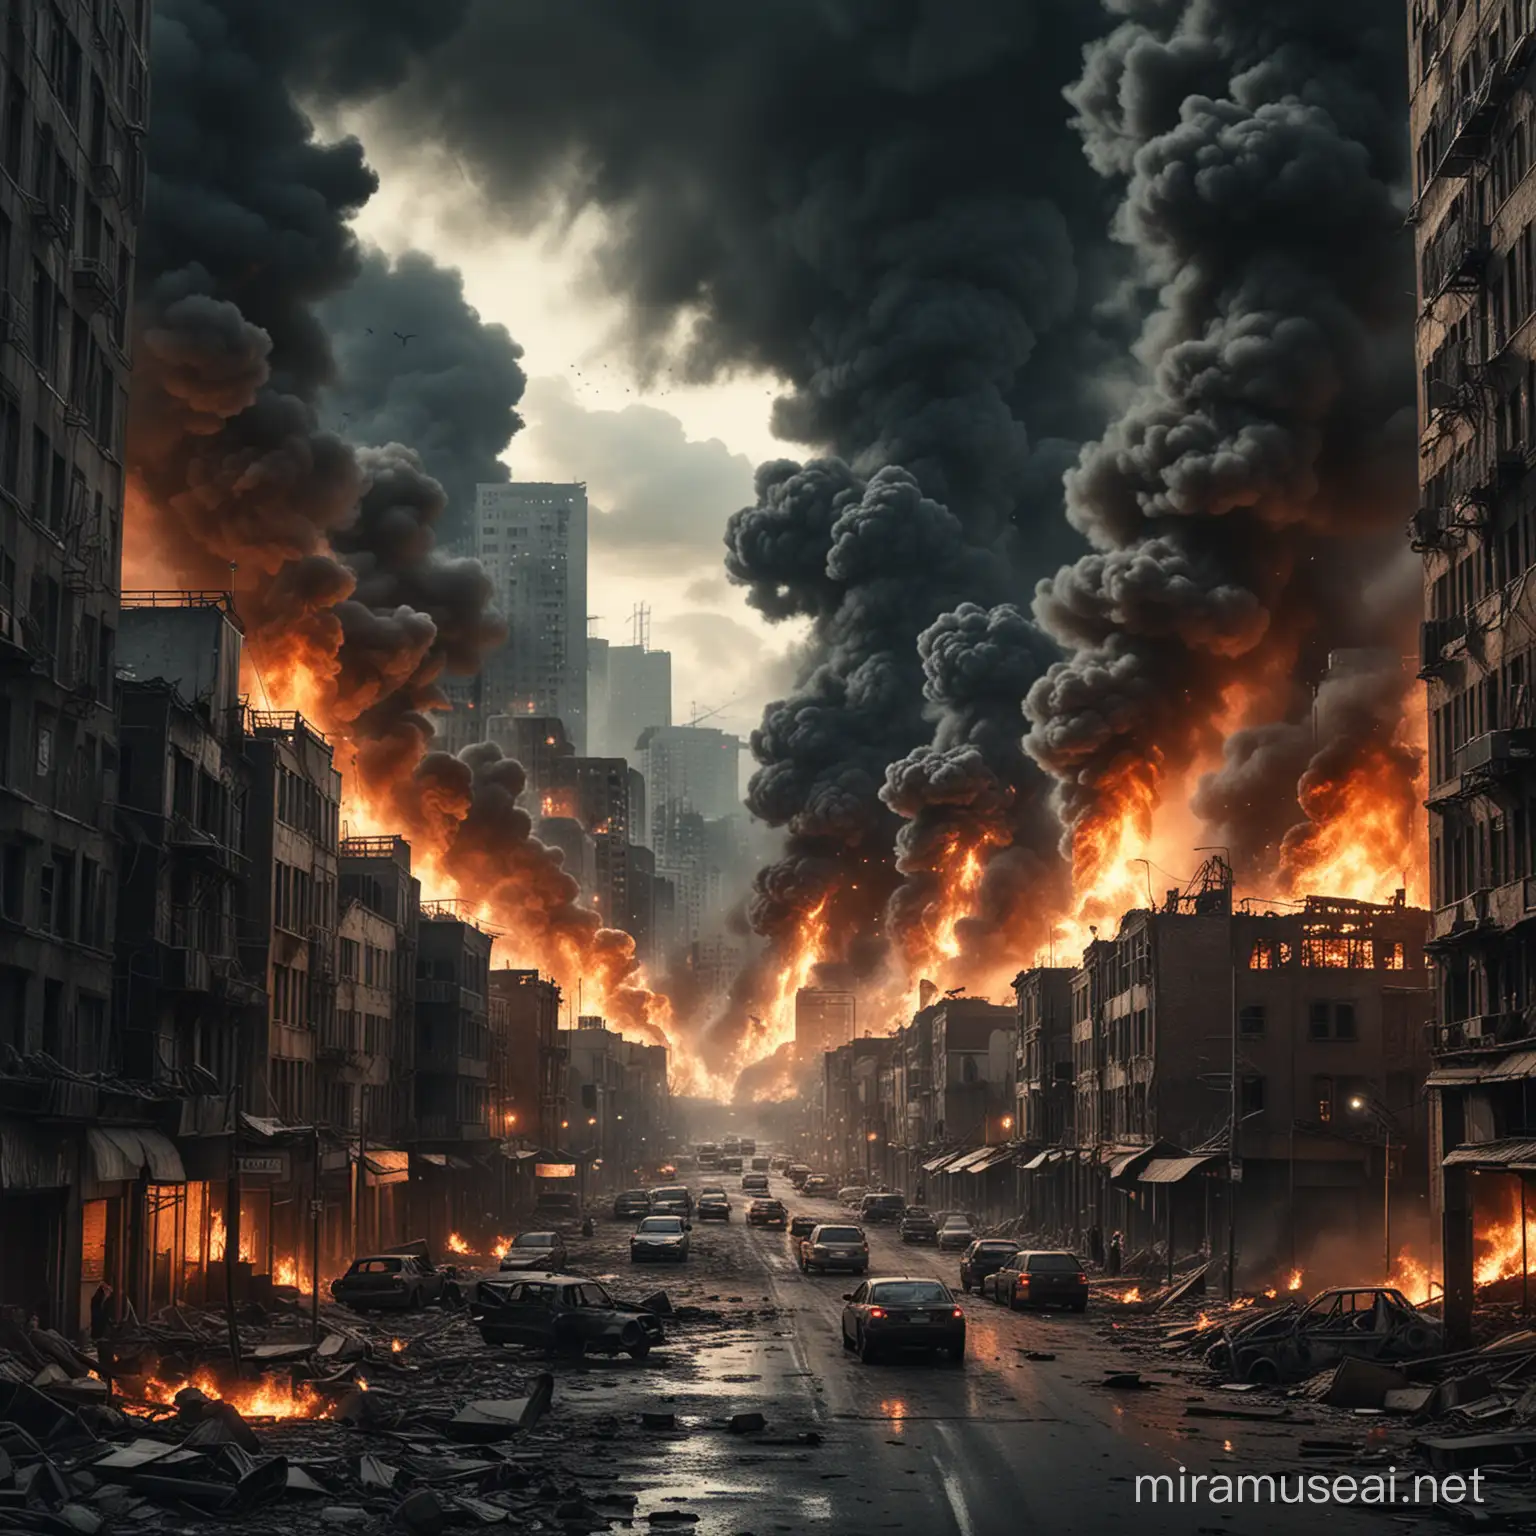 Imagine a movie poster based on portraying a poor bombed out city that some of the buildings are on fire and is spewing dark smoke on front while in the back is an advanced and modern city relucting with lights 